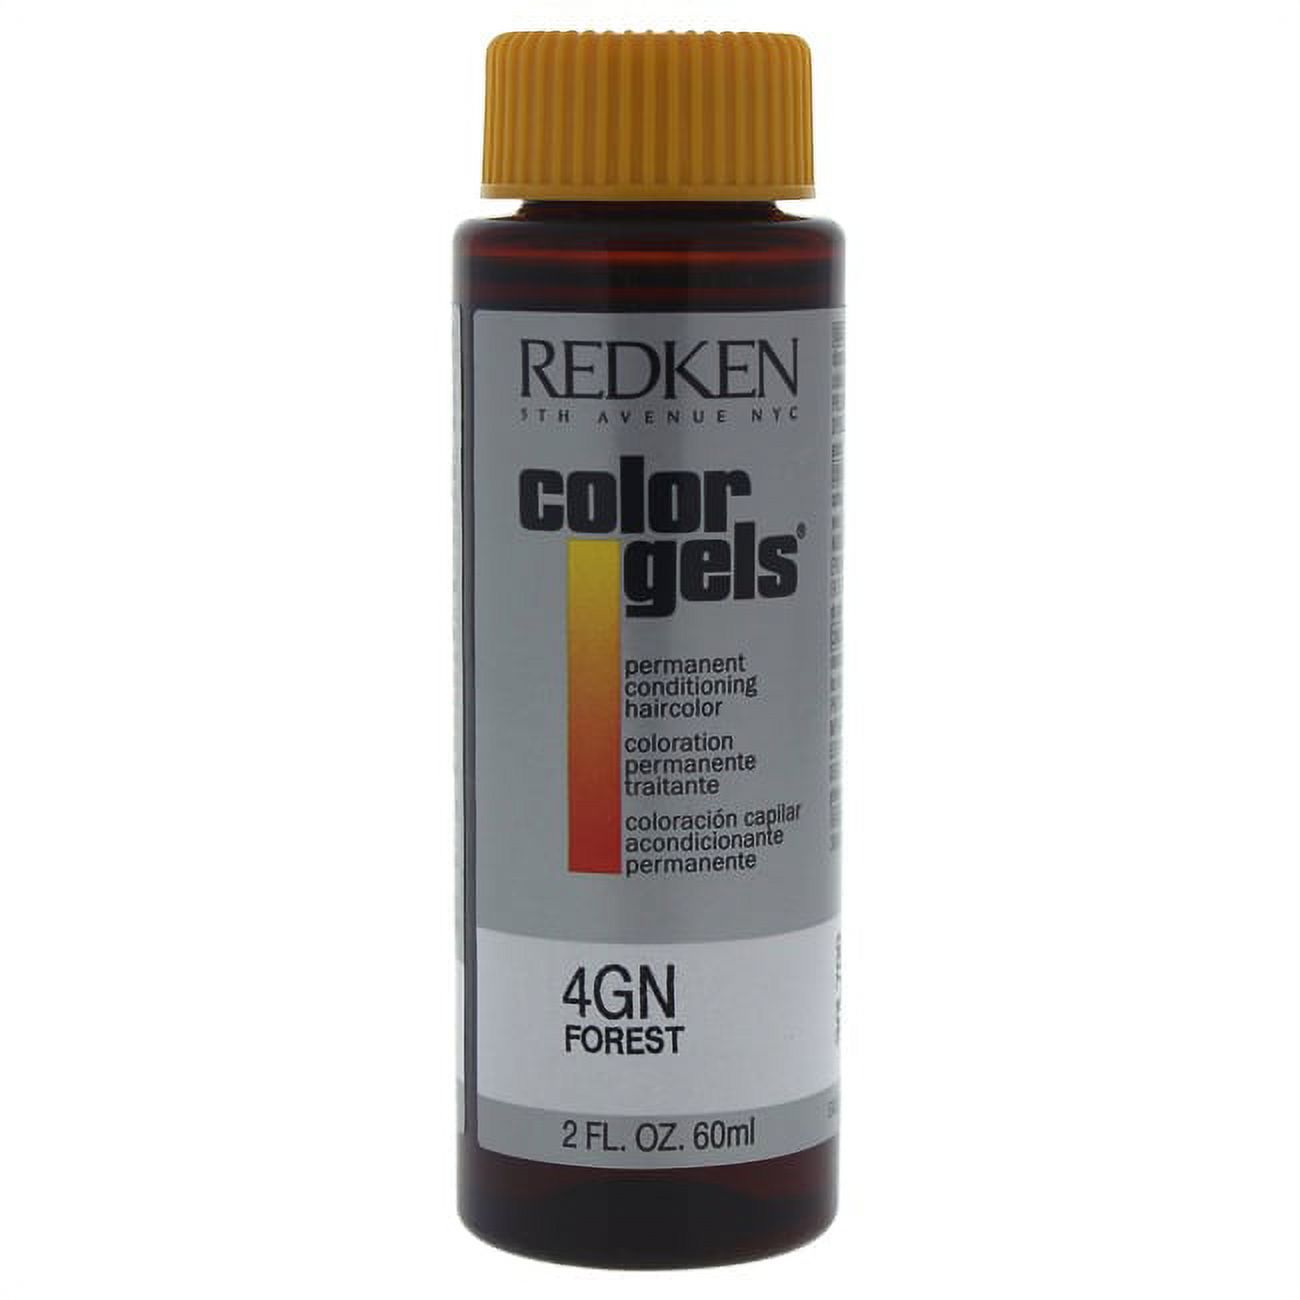 Redken Color Gels Permanent Conditioning Haircolor - Color : 4GN-Forest - image 2 of 2